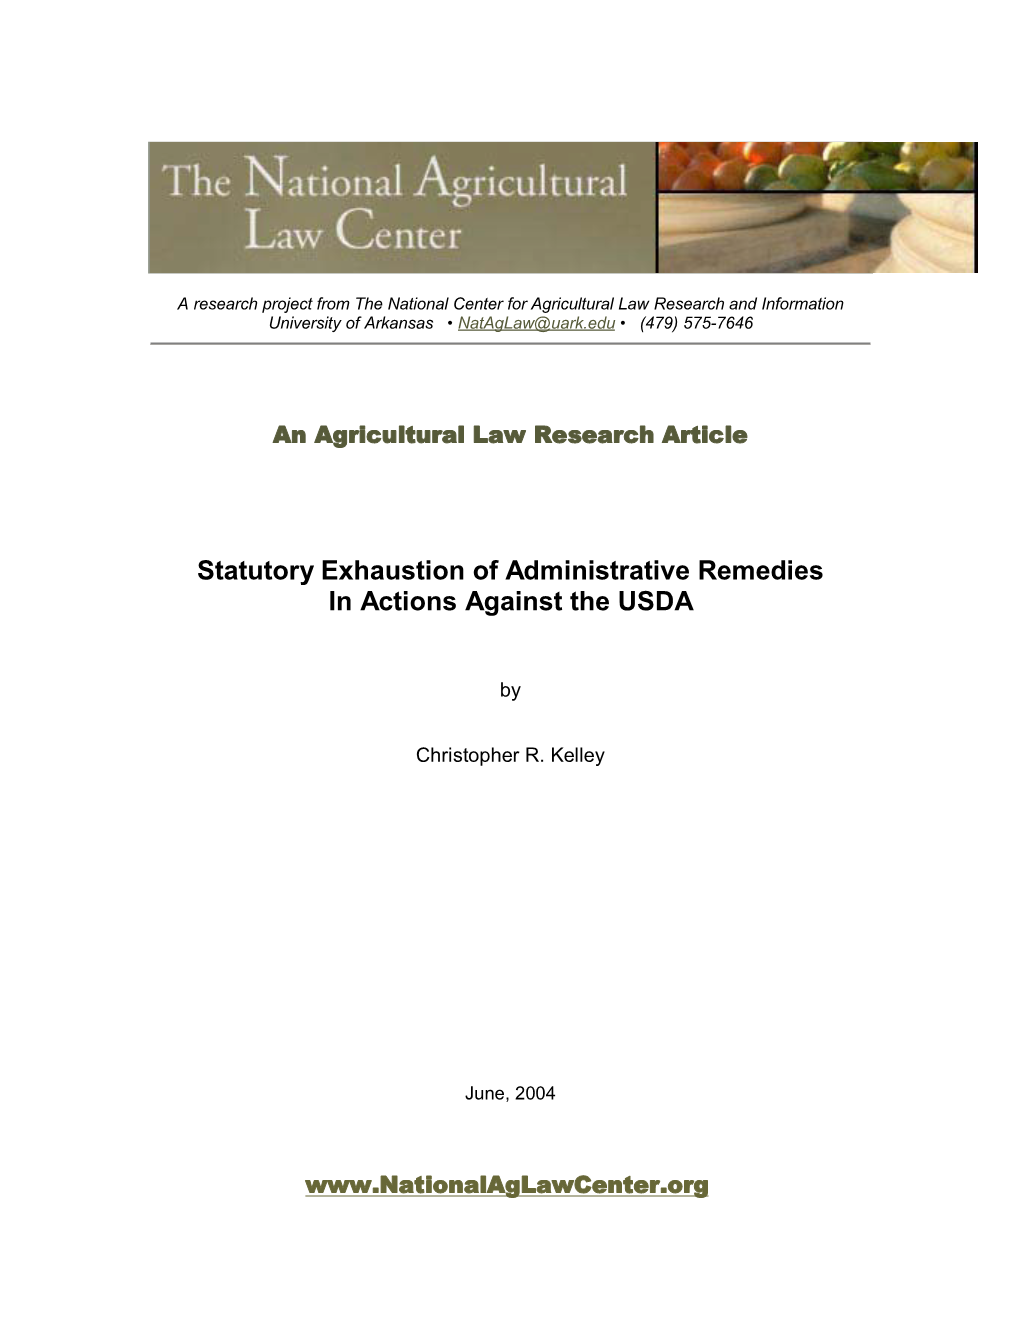 Statutory Exhaustion of Administrative Remedies in Actions Against the USDA